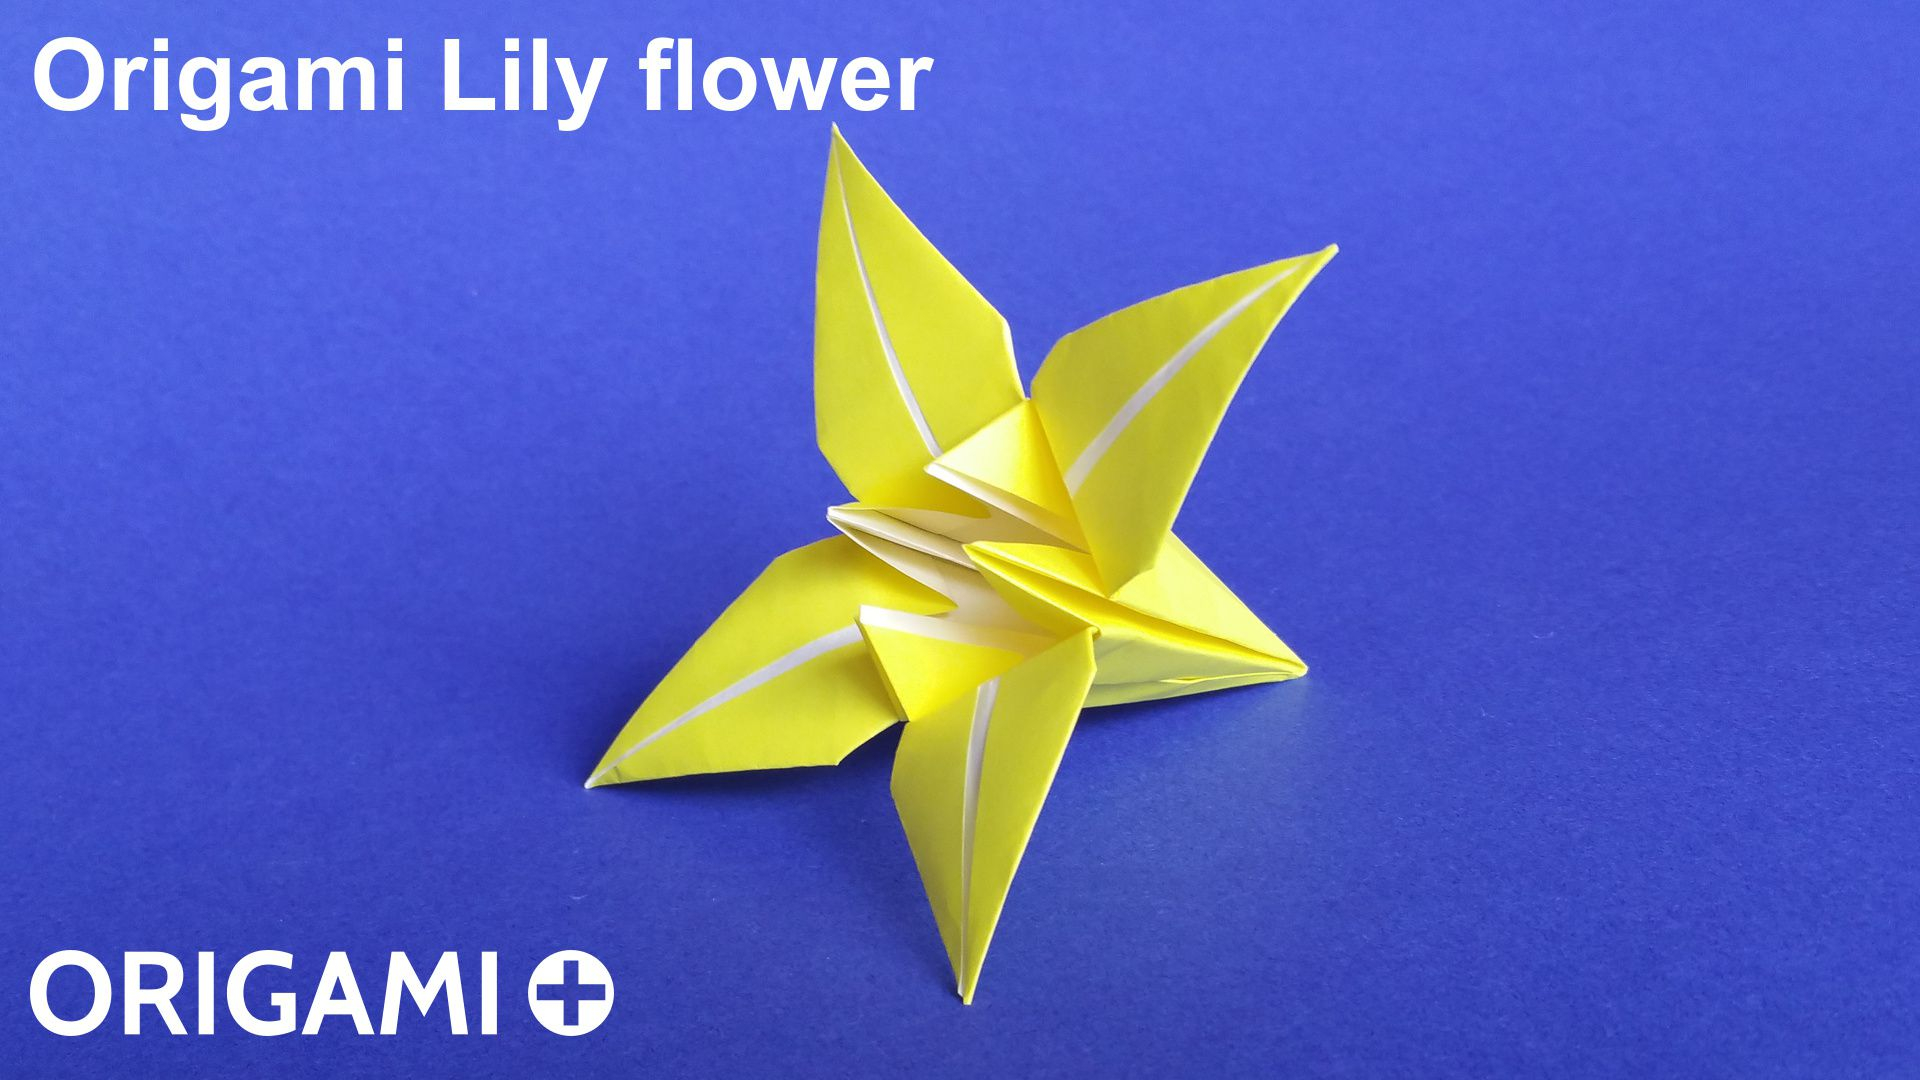 How To Make An Origami Lily Flower Origami Lily Flower